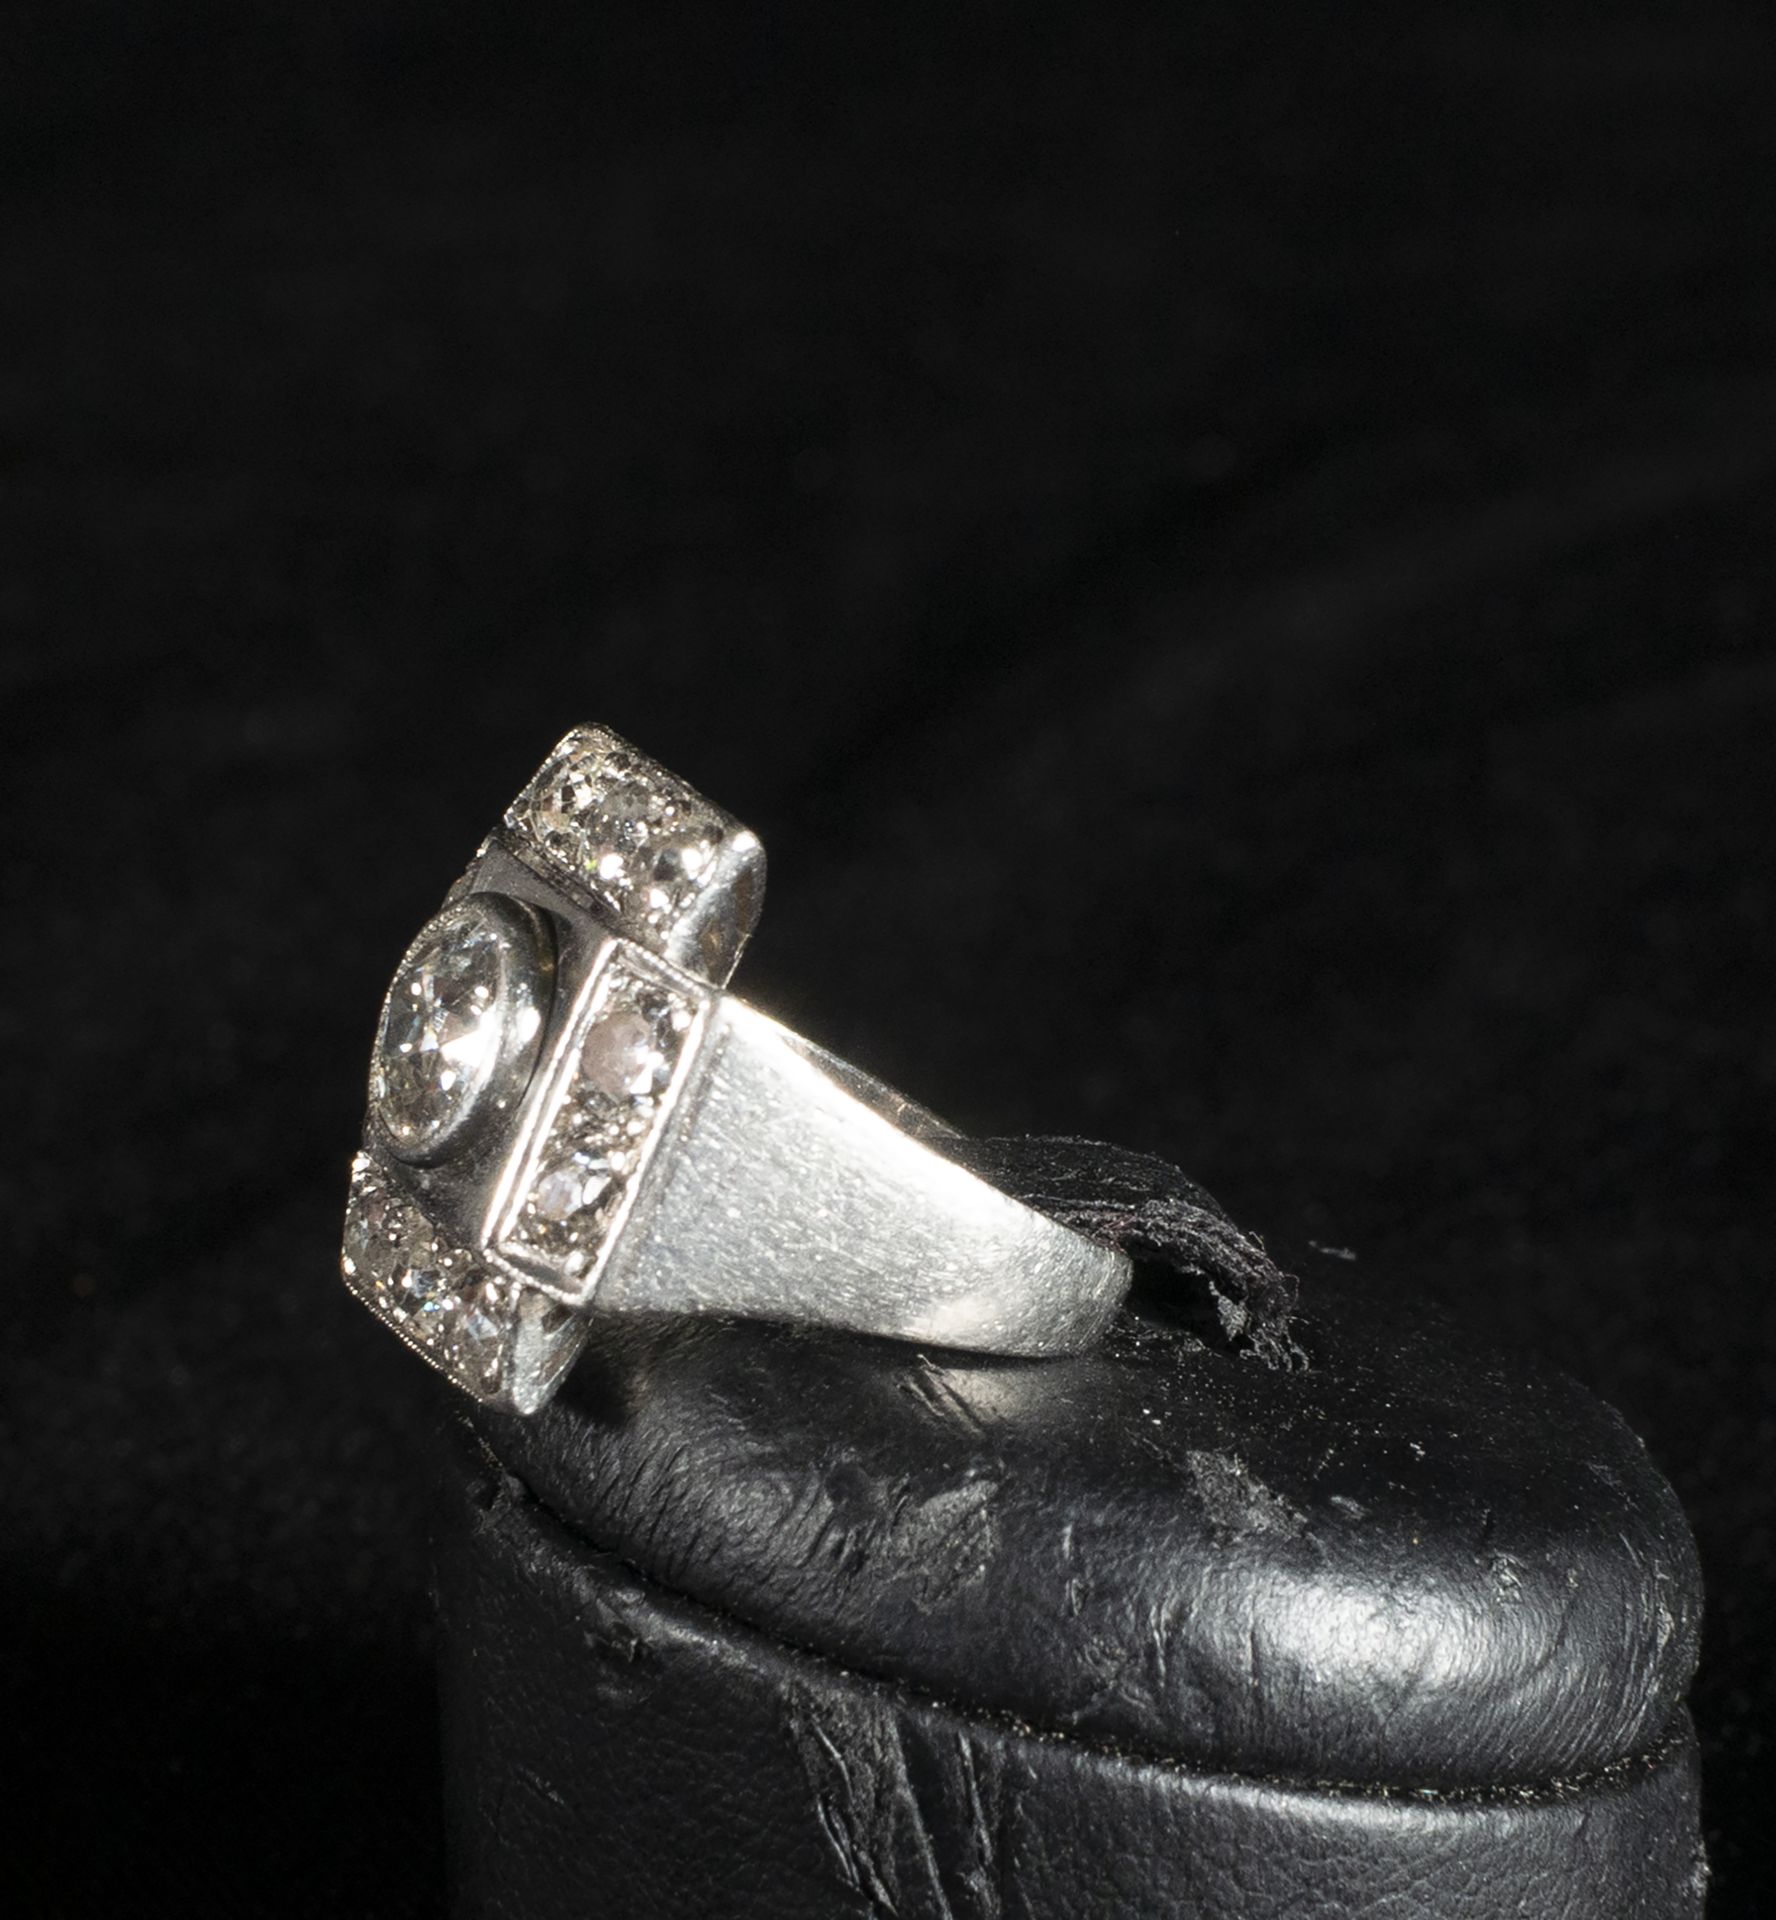 Distinguished Lady's solitaire with a large 1ct central diamond and a 1.2ct border - Image 2 of 4